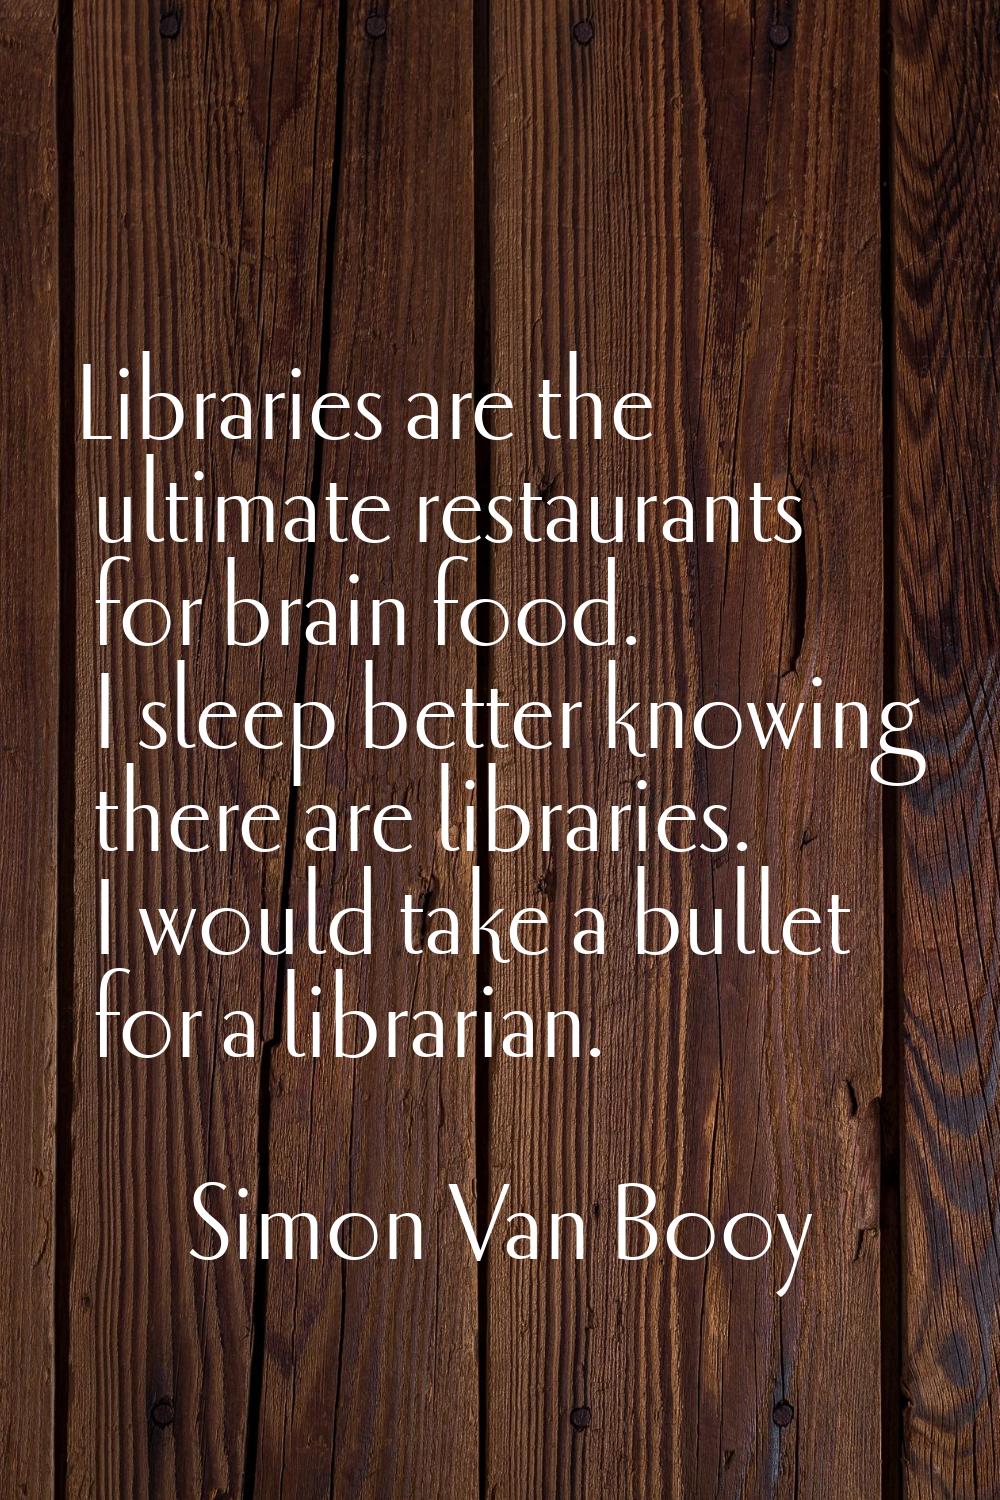 Libraries are the ultimate restaurants for brain food. I sleep better knowing there are libraries. 